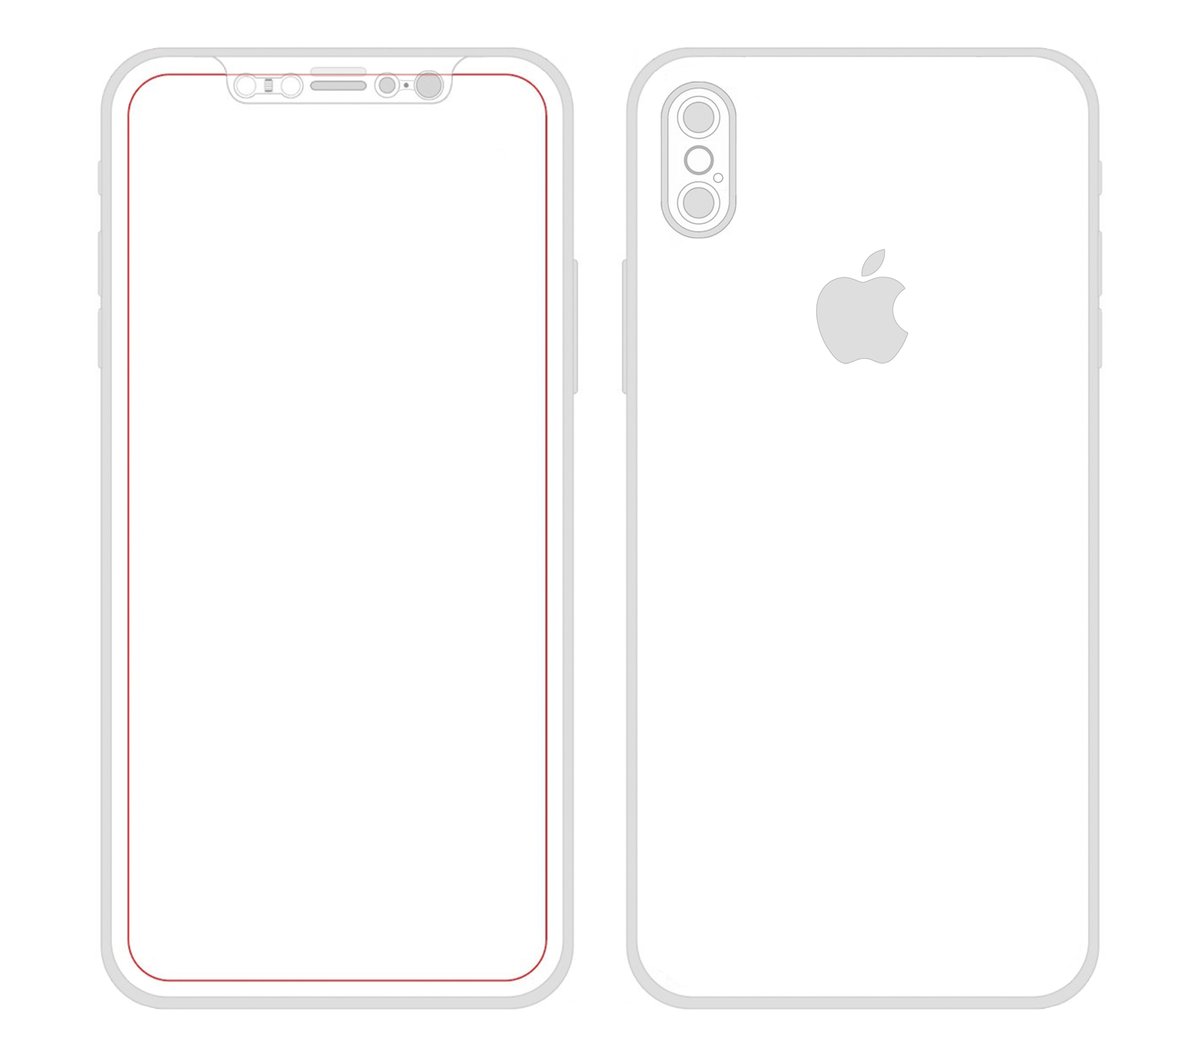 iPhone 8 dummy model surfaces with edge-to-edge display, no rear 